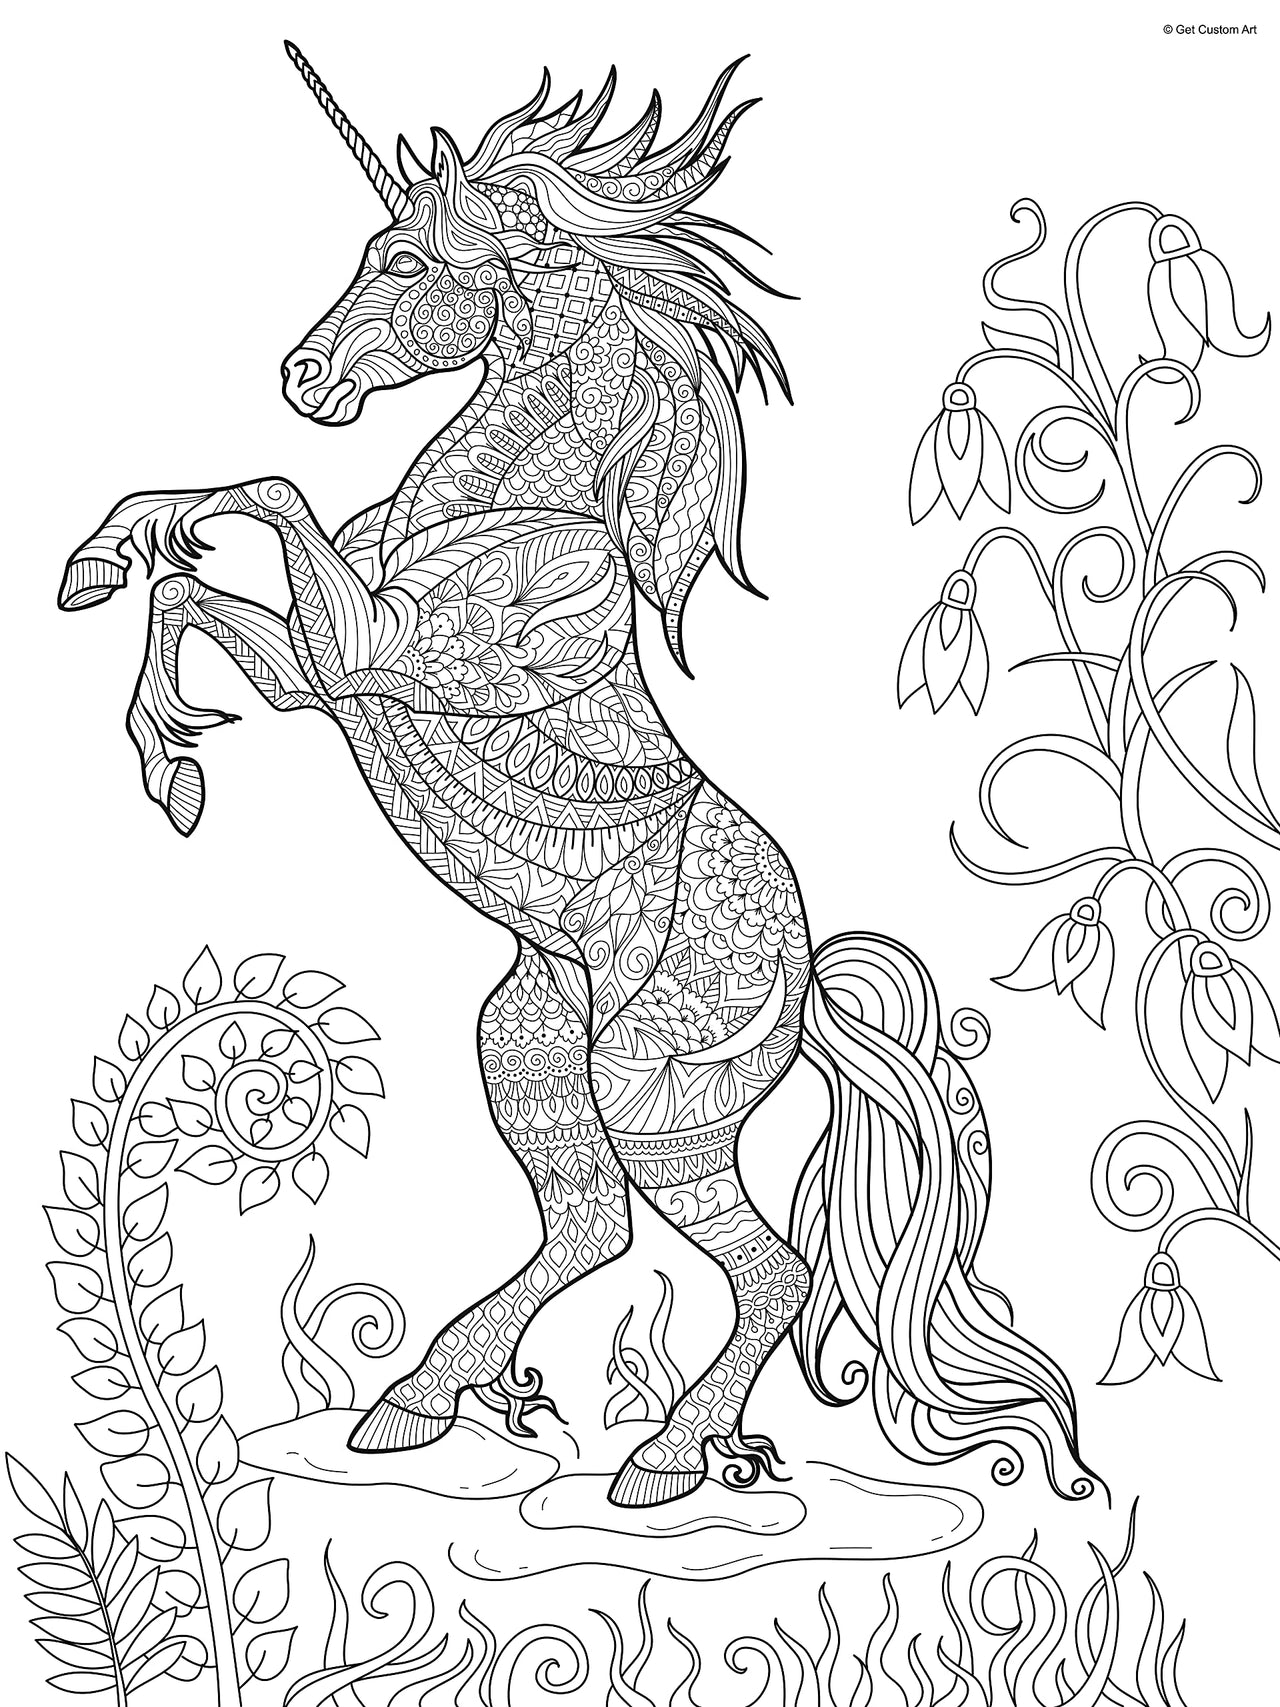 Fantasy Unicorn Coloring Poster – Animal Art for Kids and Adults | DIY Stress Relief Coloring Poster